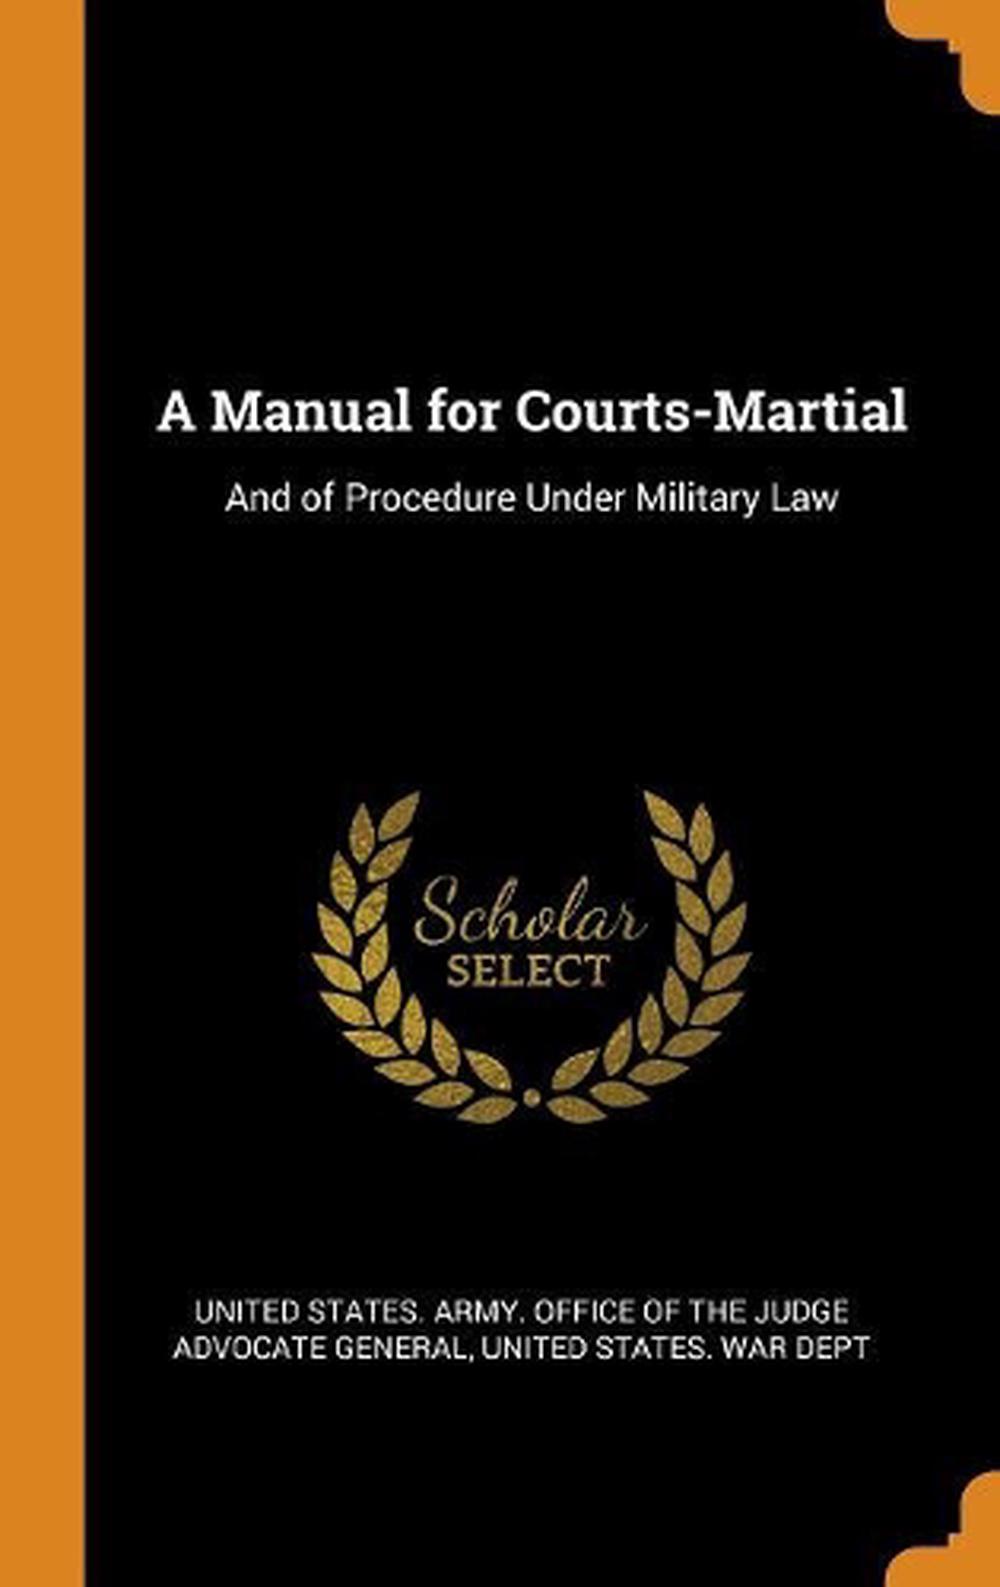 Manual for Courts martial: And of Procedure Under Military Law